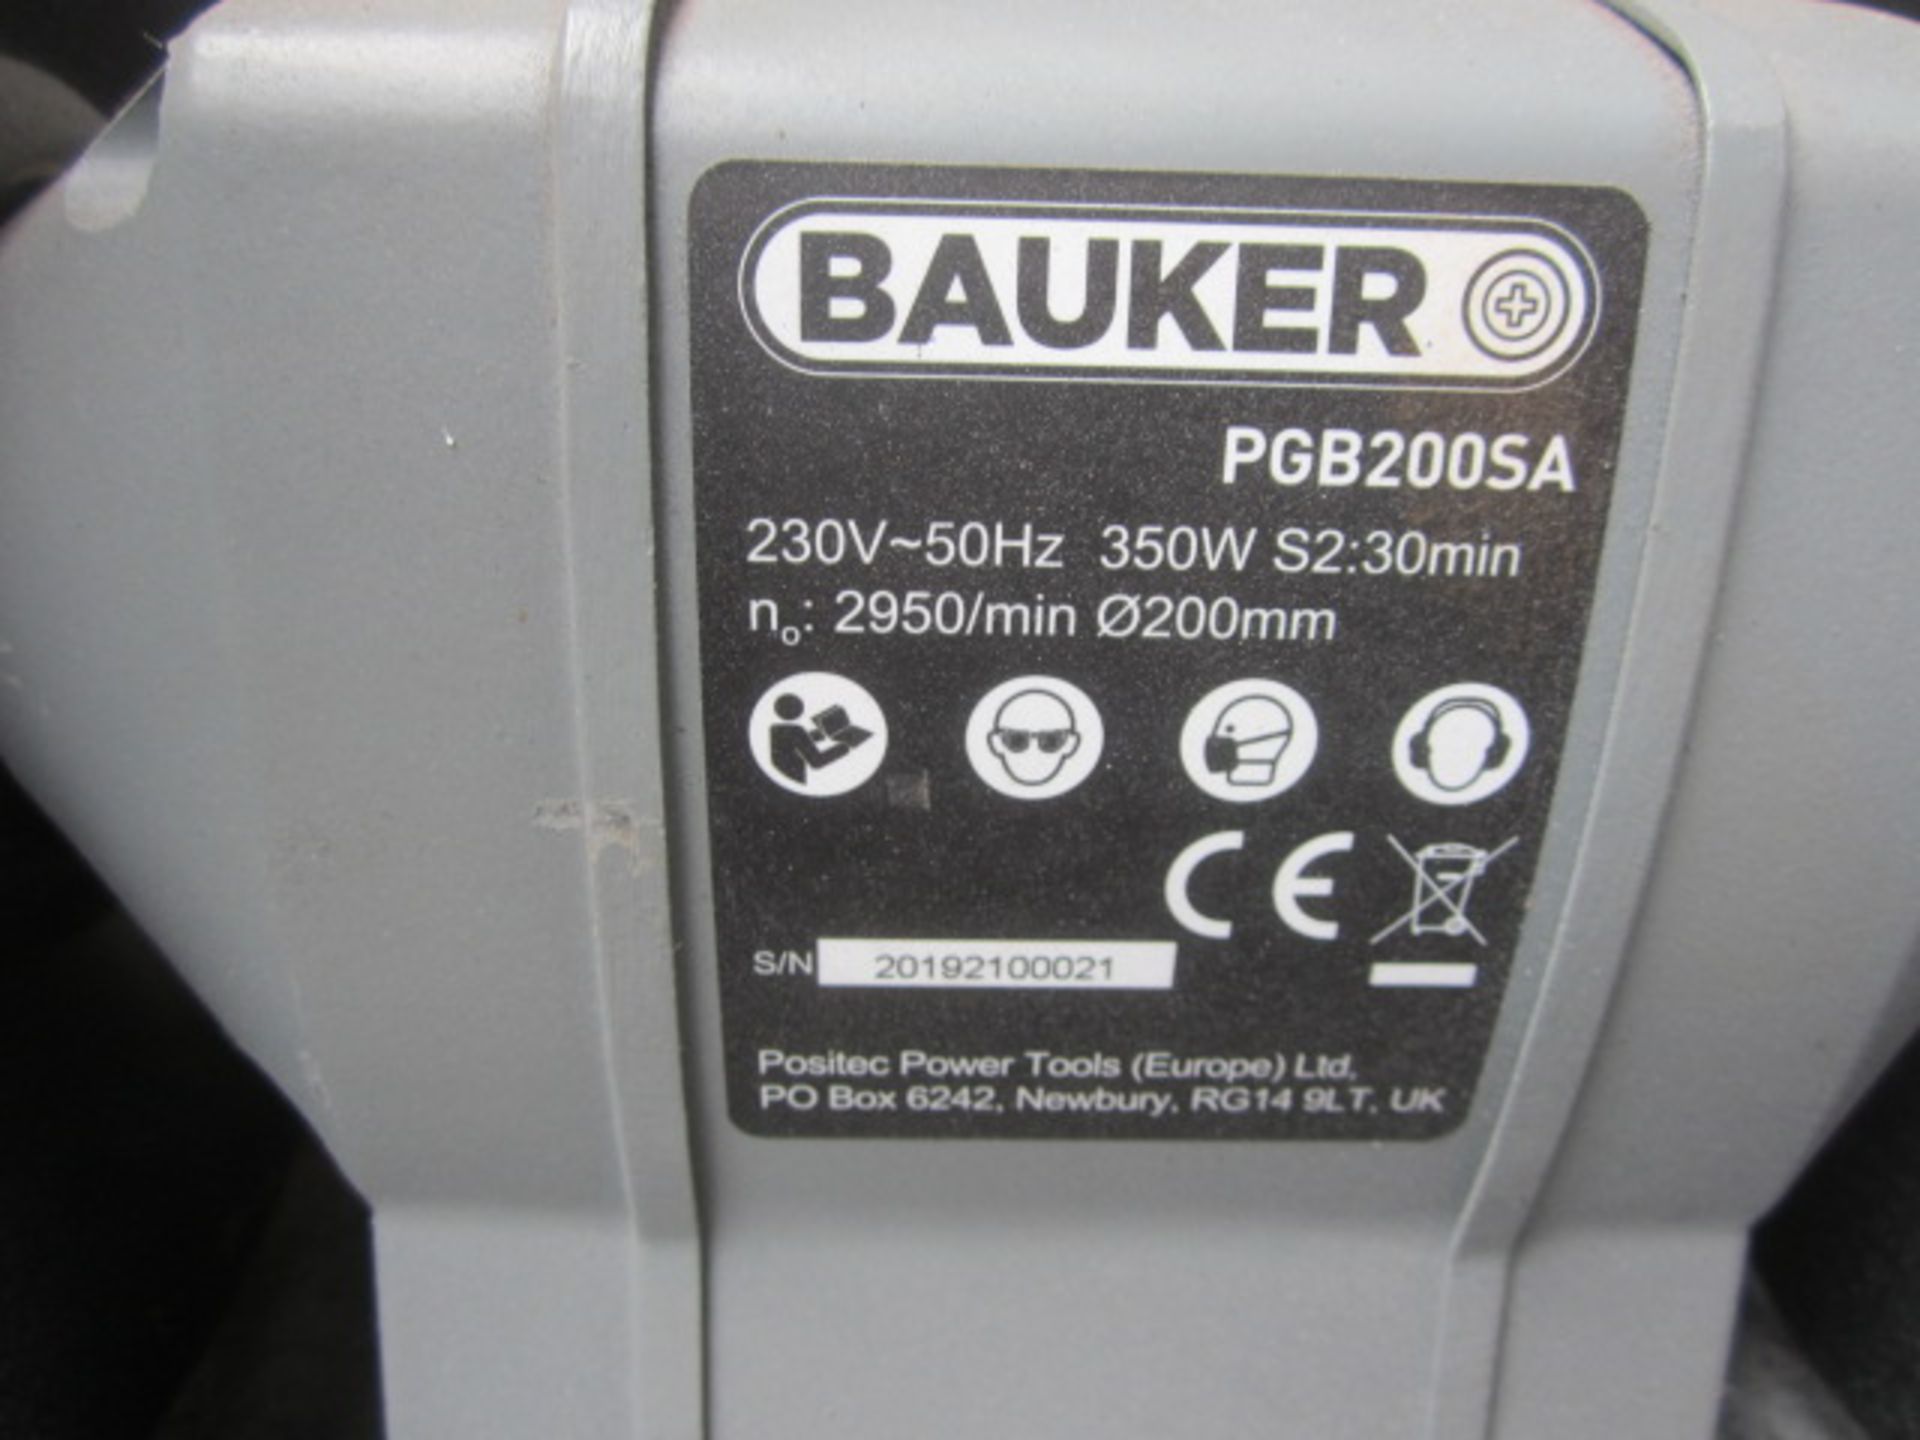 Baucker PGB2005A double ended bench grinder, serial no. 20192100021 - Image 2 of 2